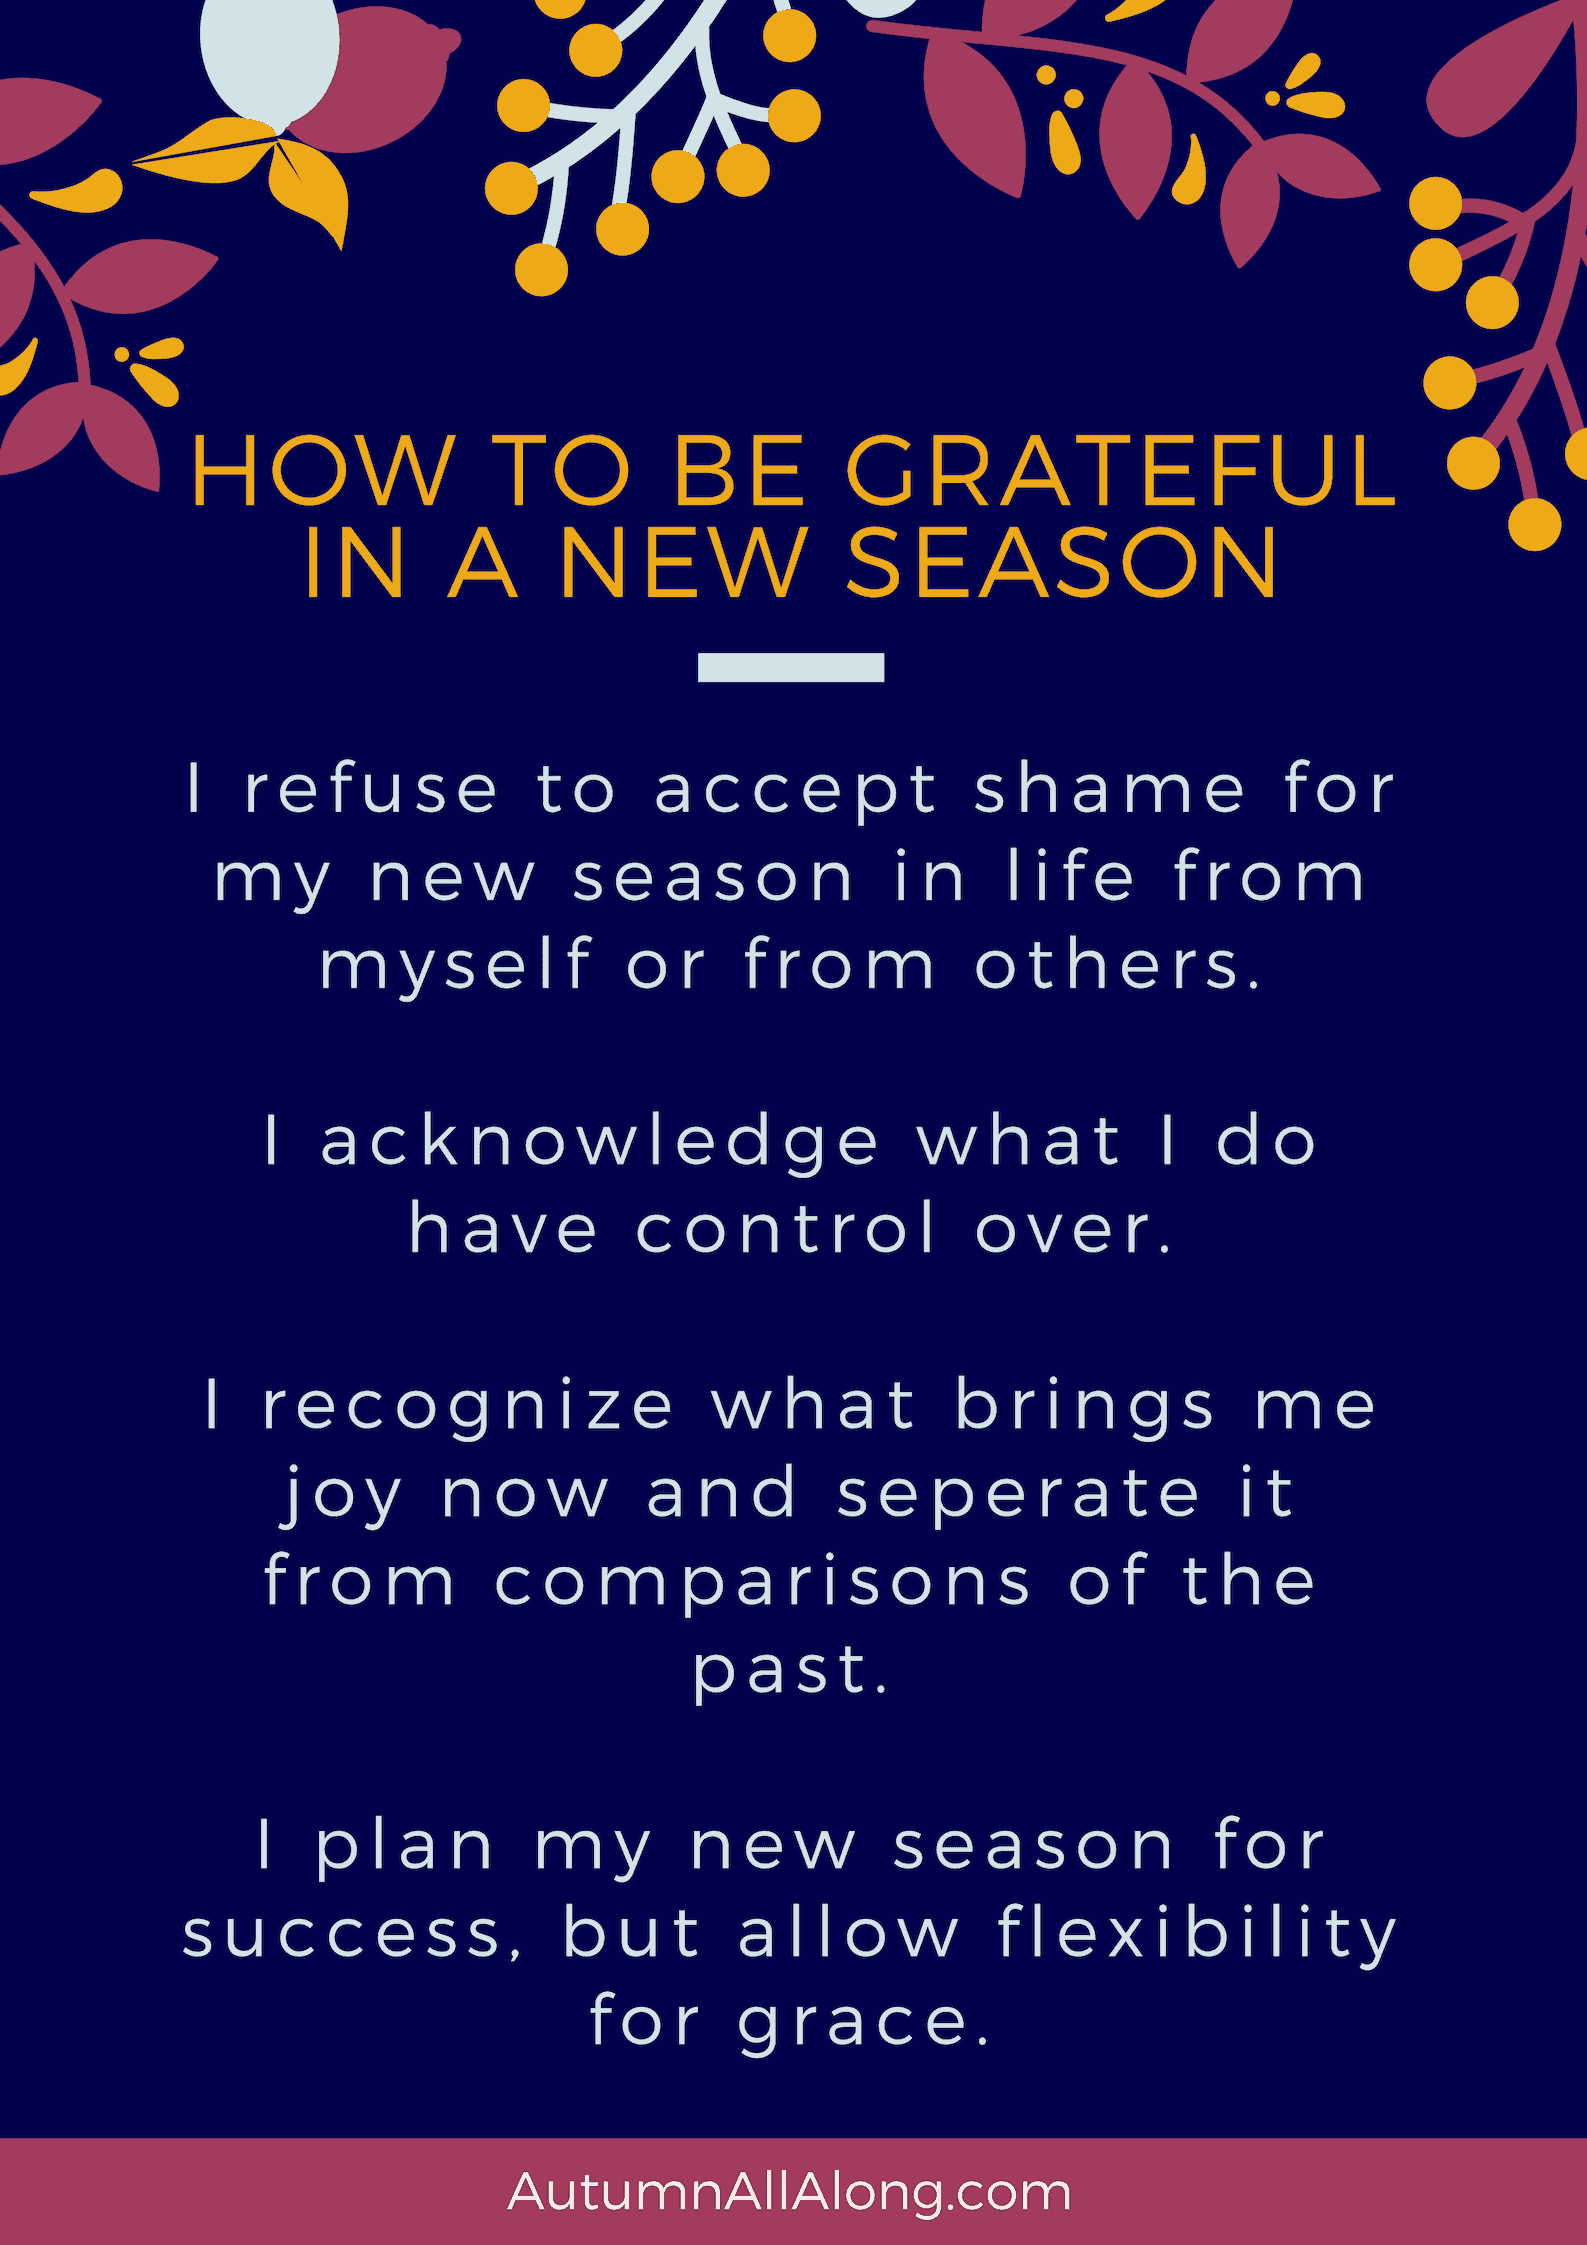 Mantras to help you be grateful in a new season in life. | via Autumn All Along